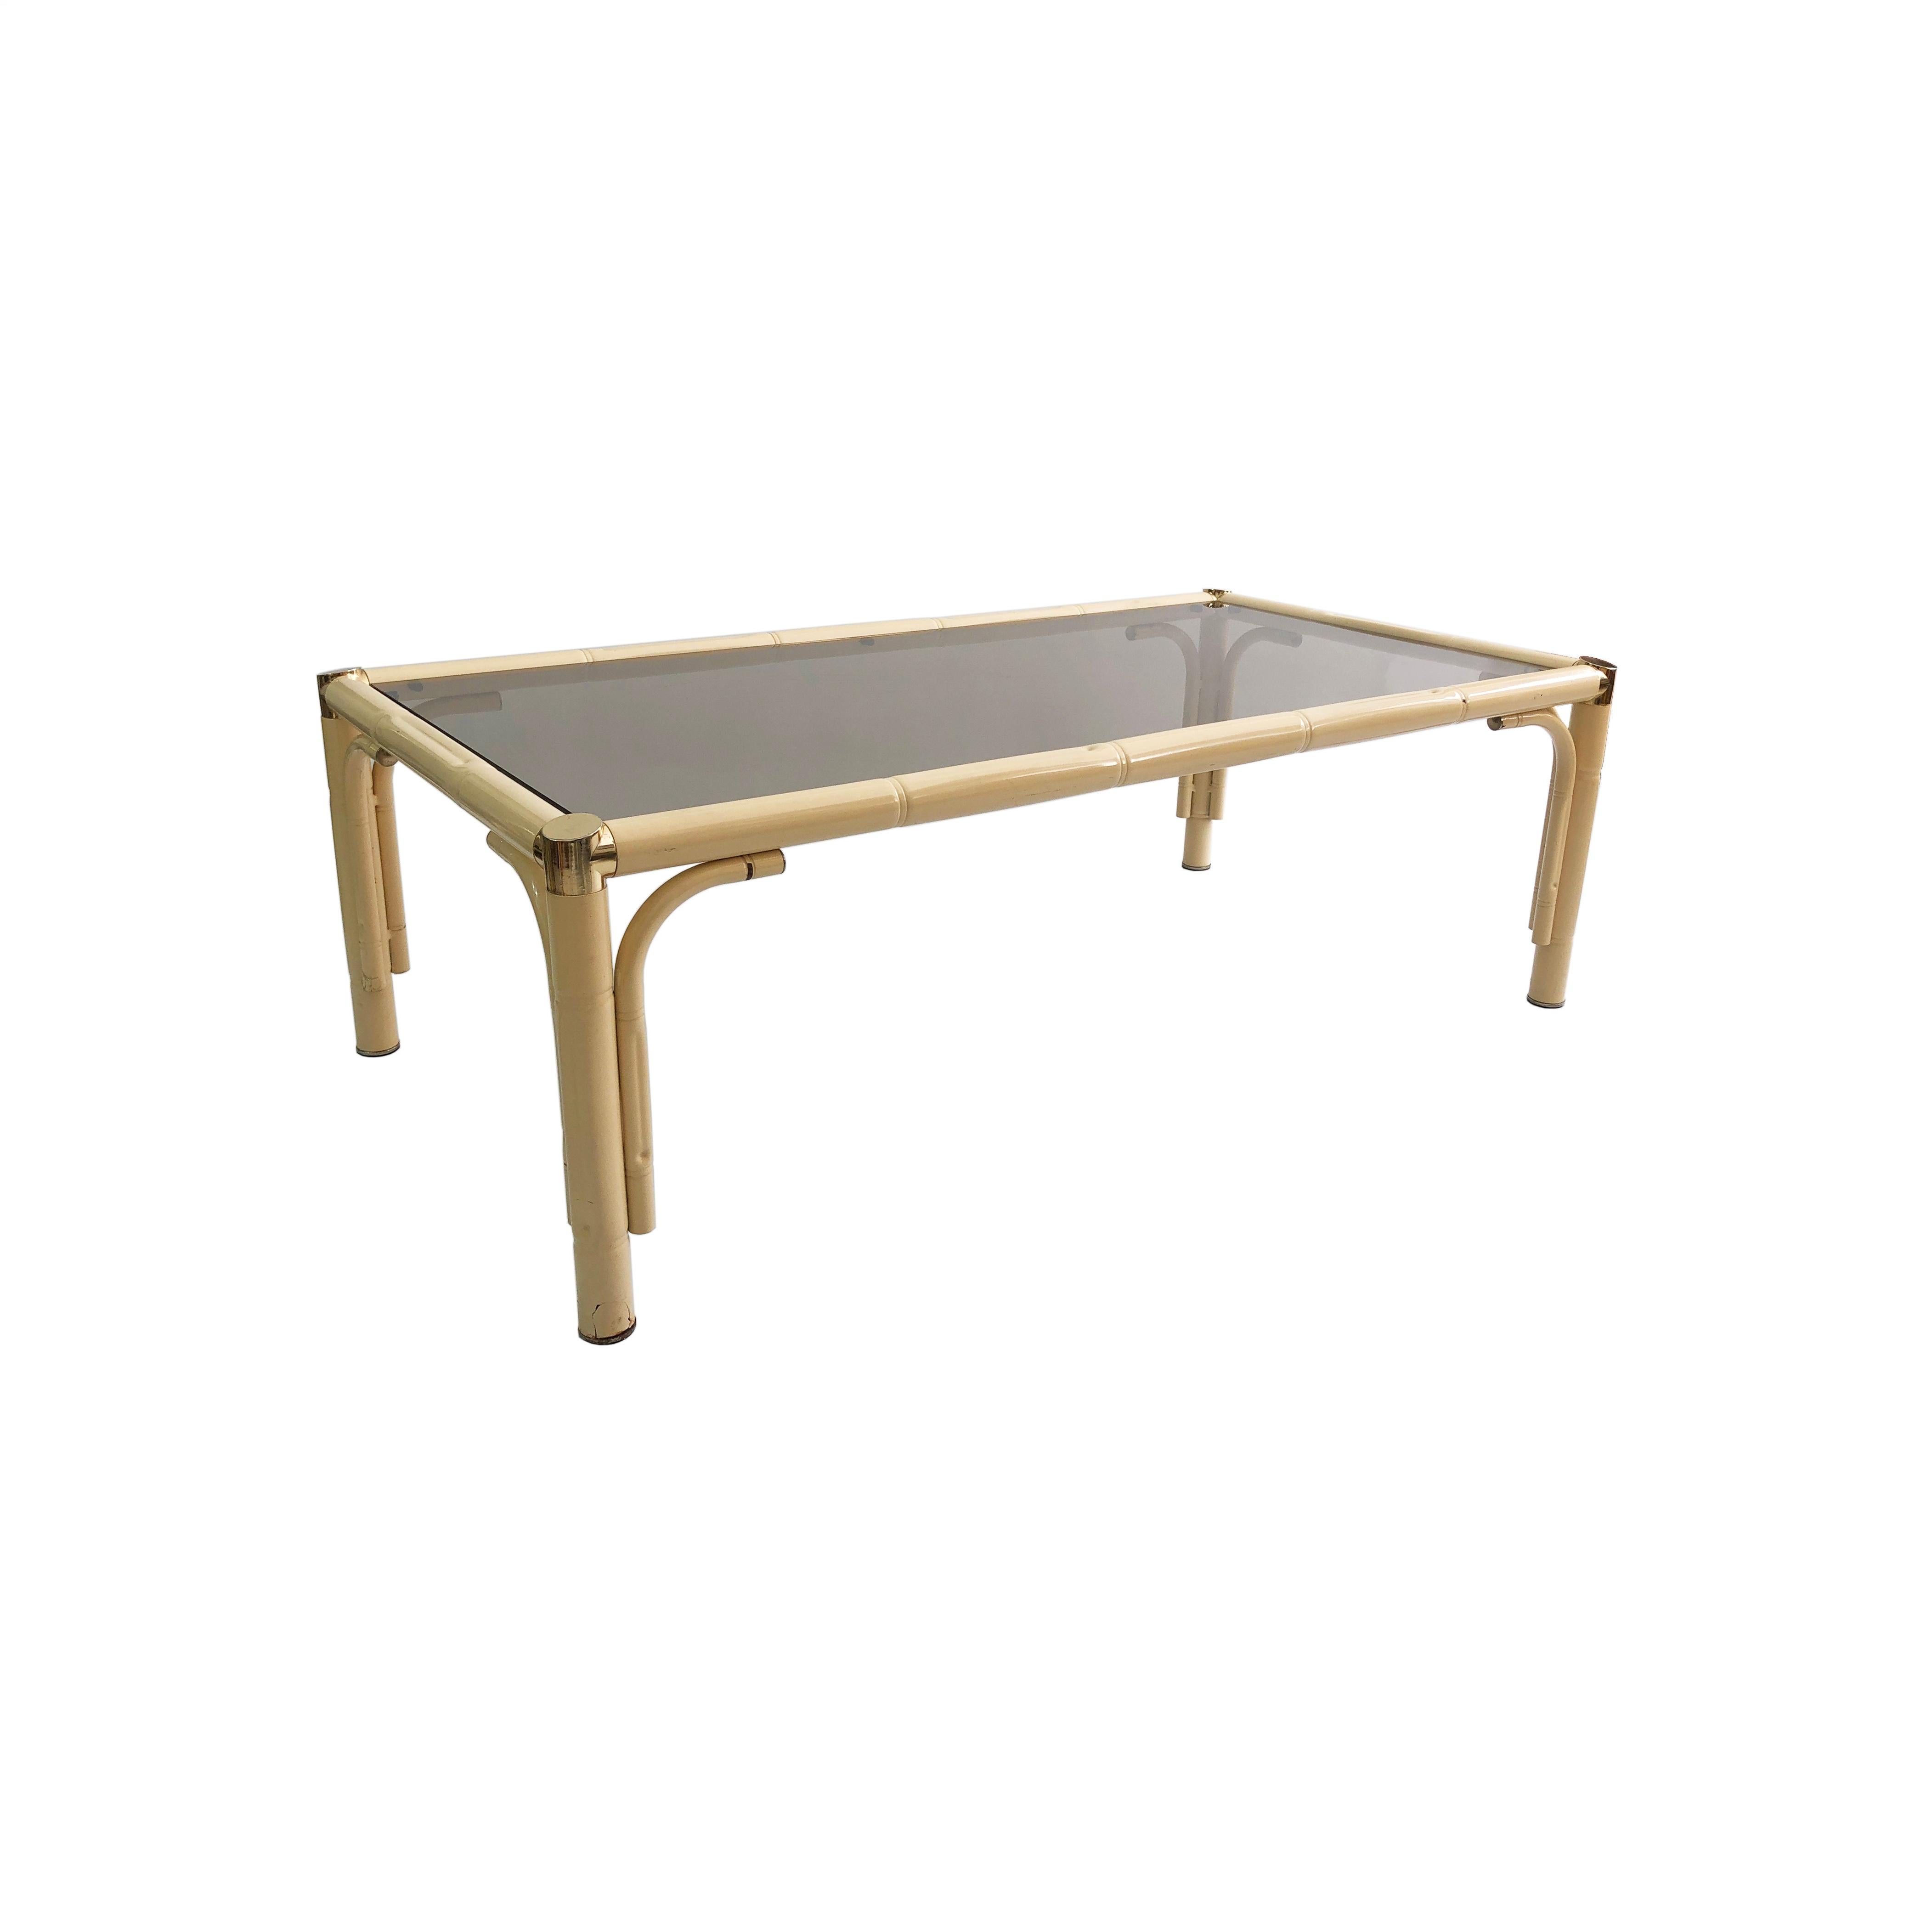 A splendid coffee table of glass and faux-bamboo, that has its provenance in 1970s Italy and whose muted cream tones would make a stylish centrepiece for any room. A tubular powder-coated metal frame houses a rectangular pane of smoked glass, with